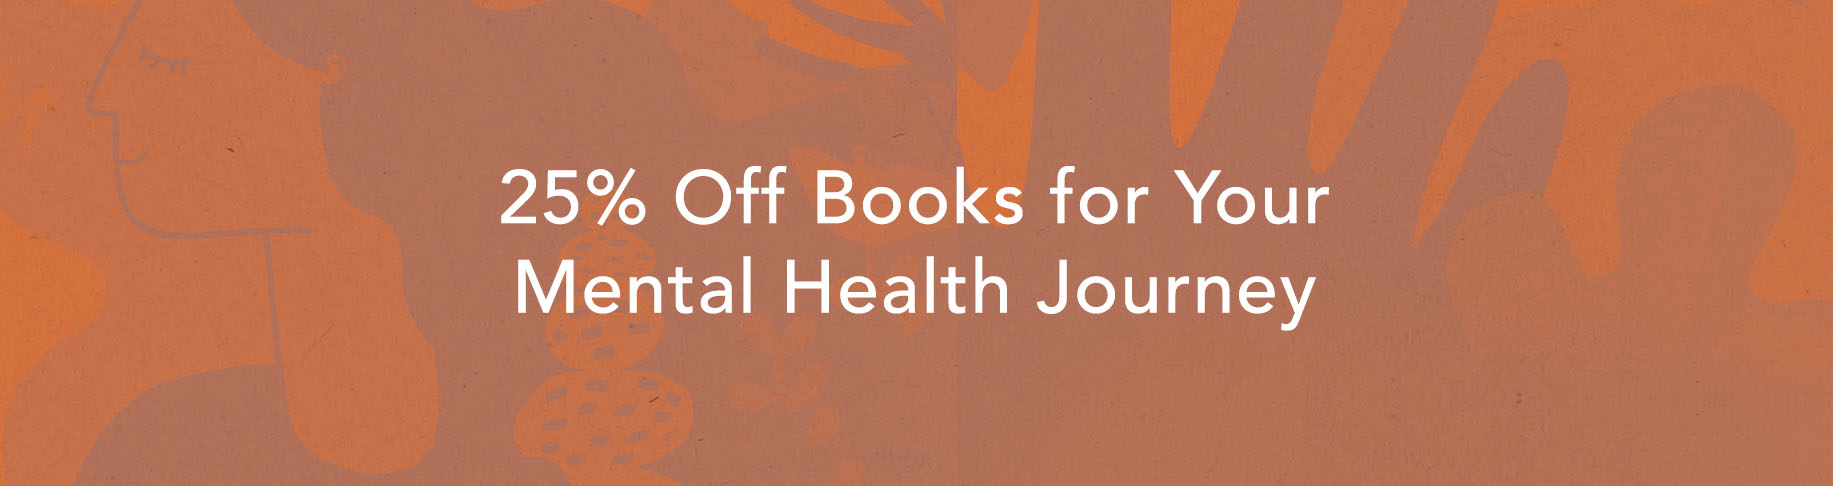 25% Off Books for Your Mental Health Journey